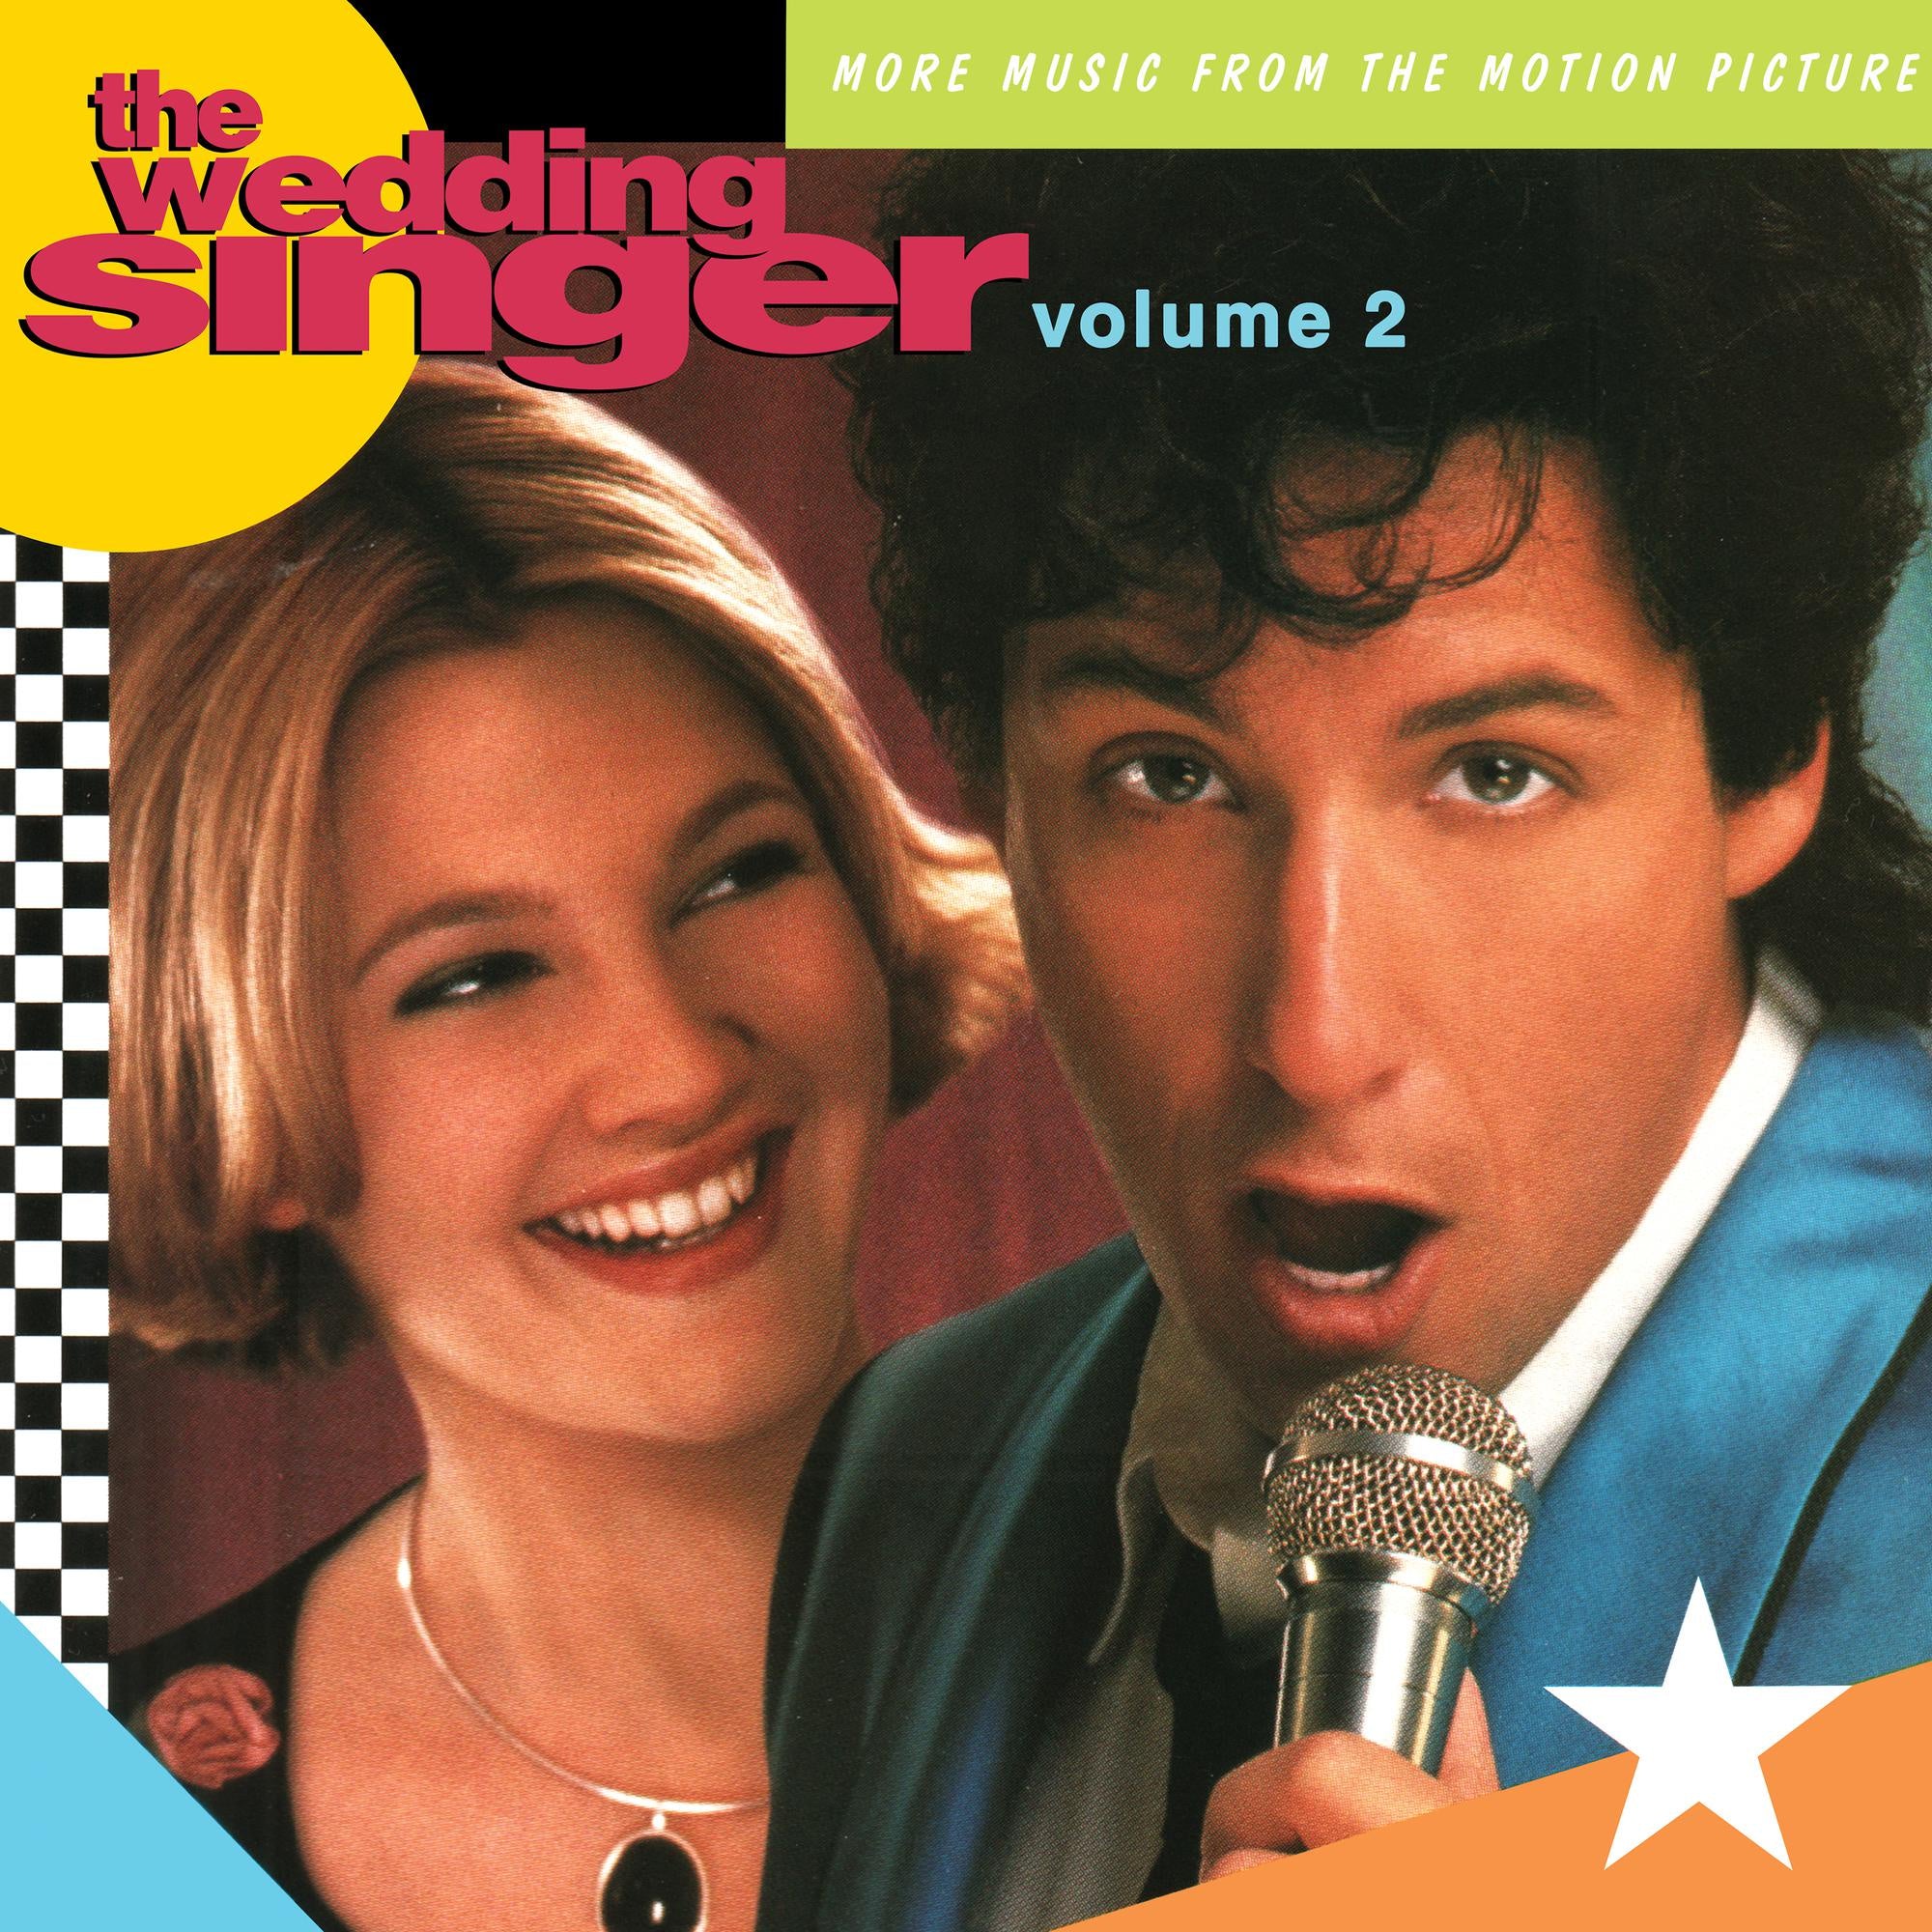 Various ‎– The Wedding Singer Vol 2 (More Music From The Motion Picture) - New LP Record 2022 Friday Music Transparent Yellow Vinyl - Soundtrack